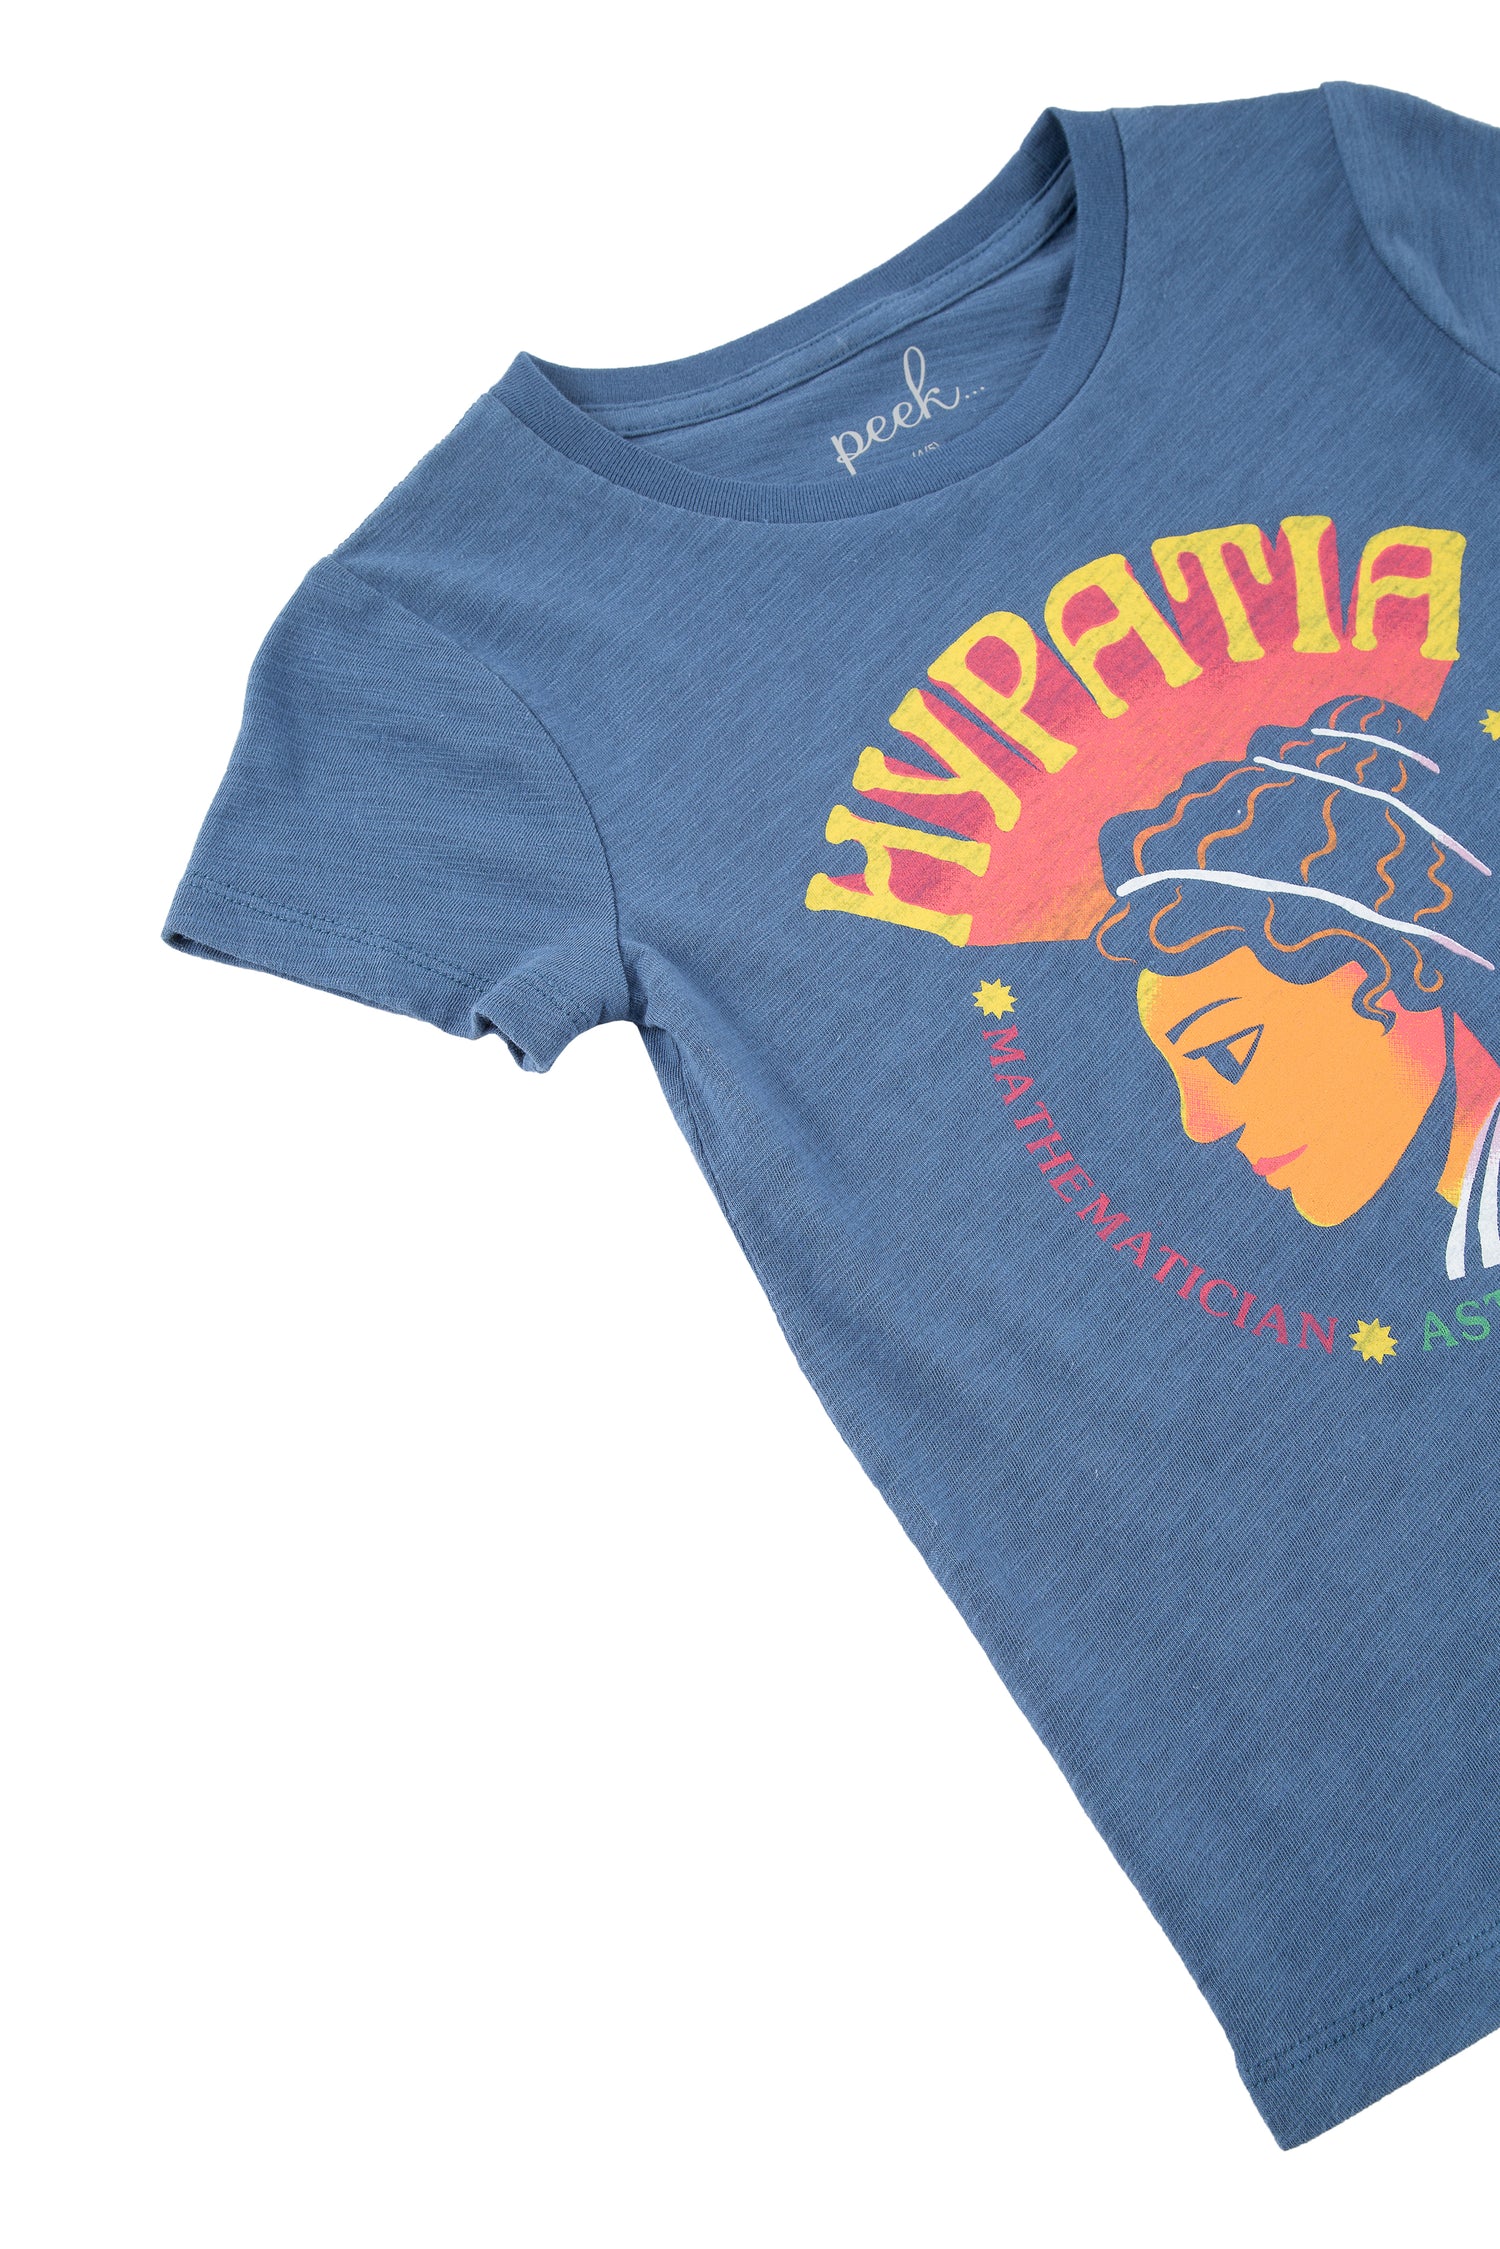 Close up of blue t-shirt with bust of Hypatia and "mathematician astronomer philosopher" text